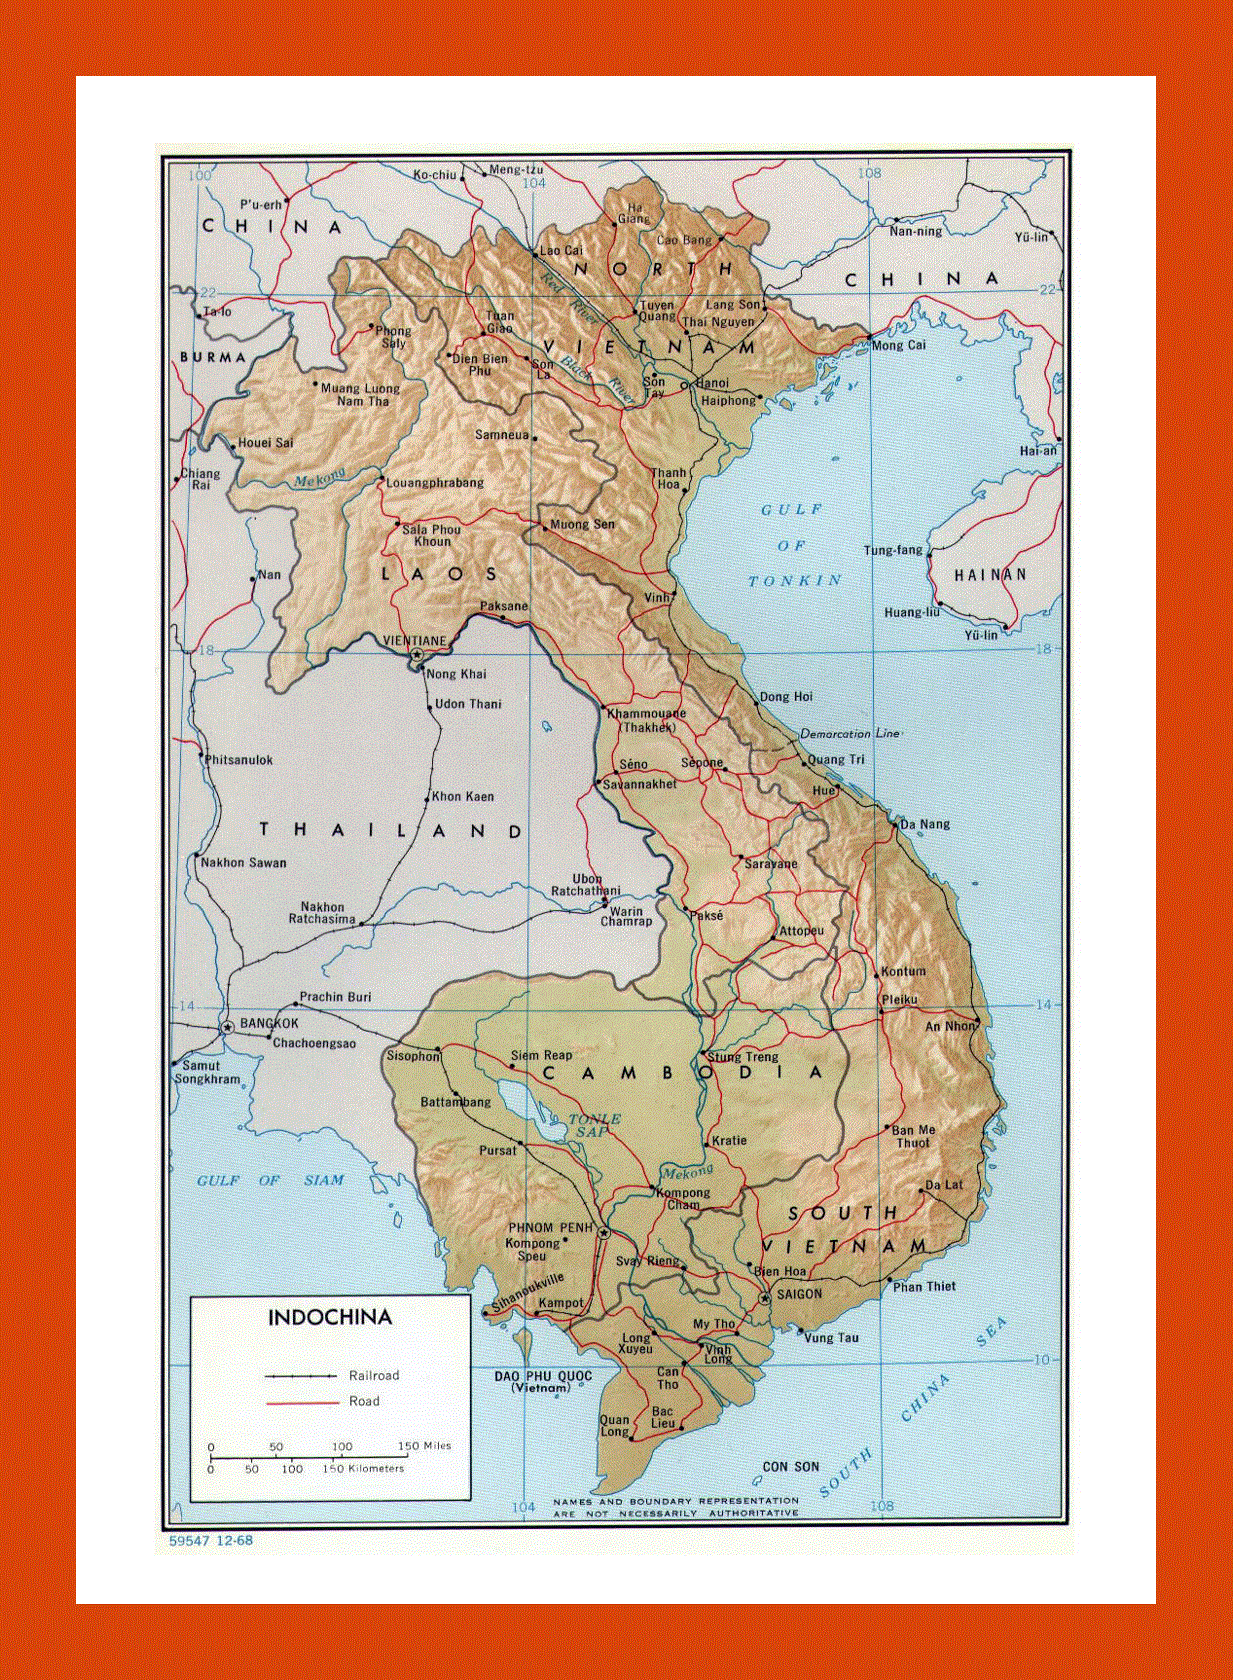 Political map of Indochina - 1968